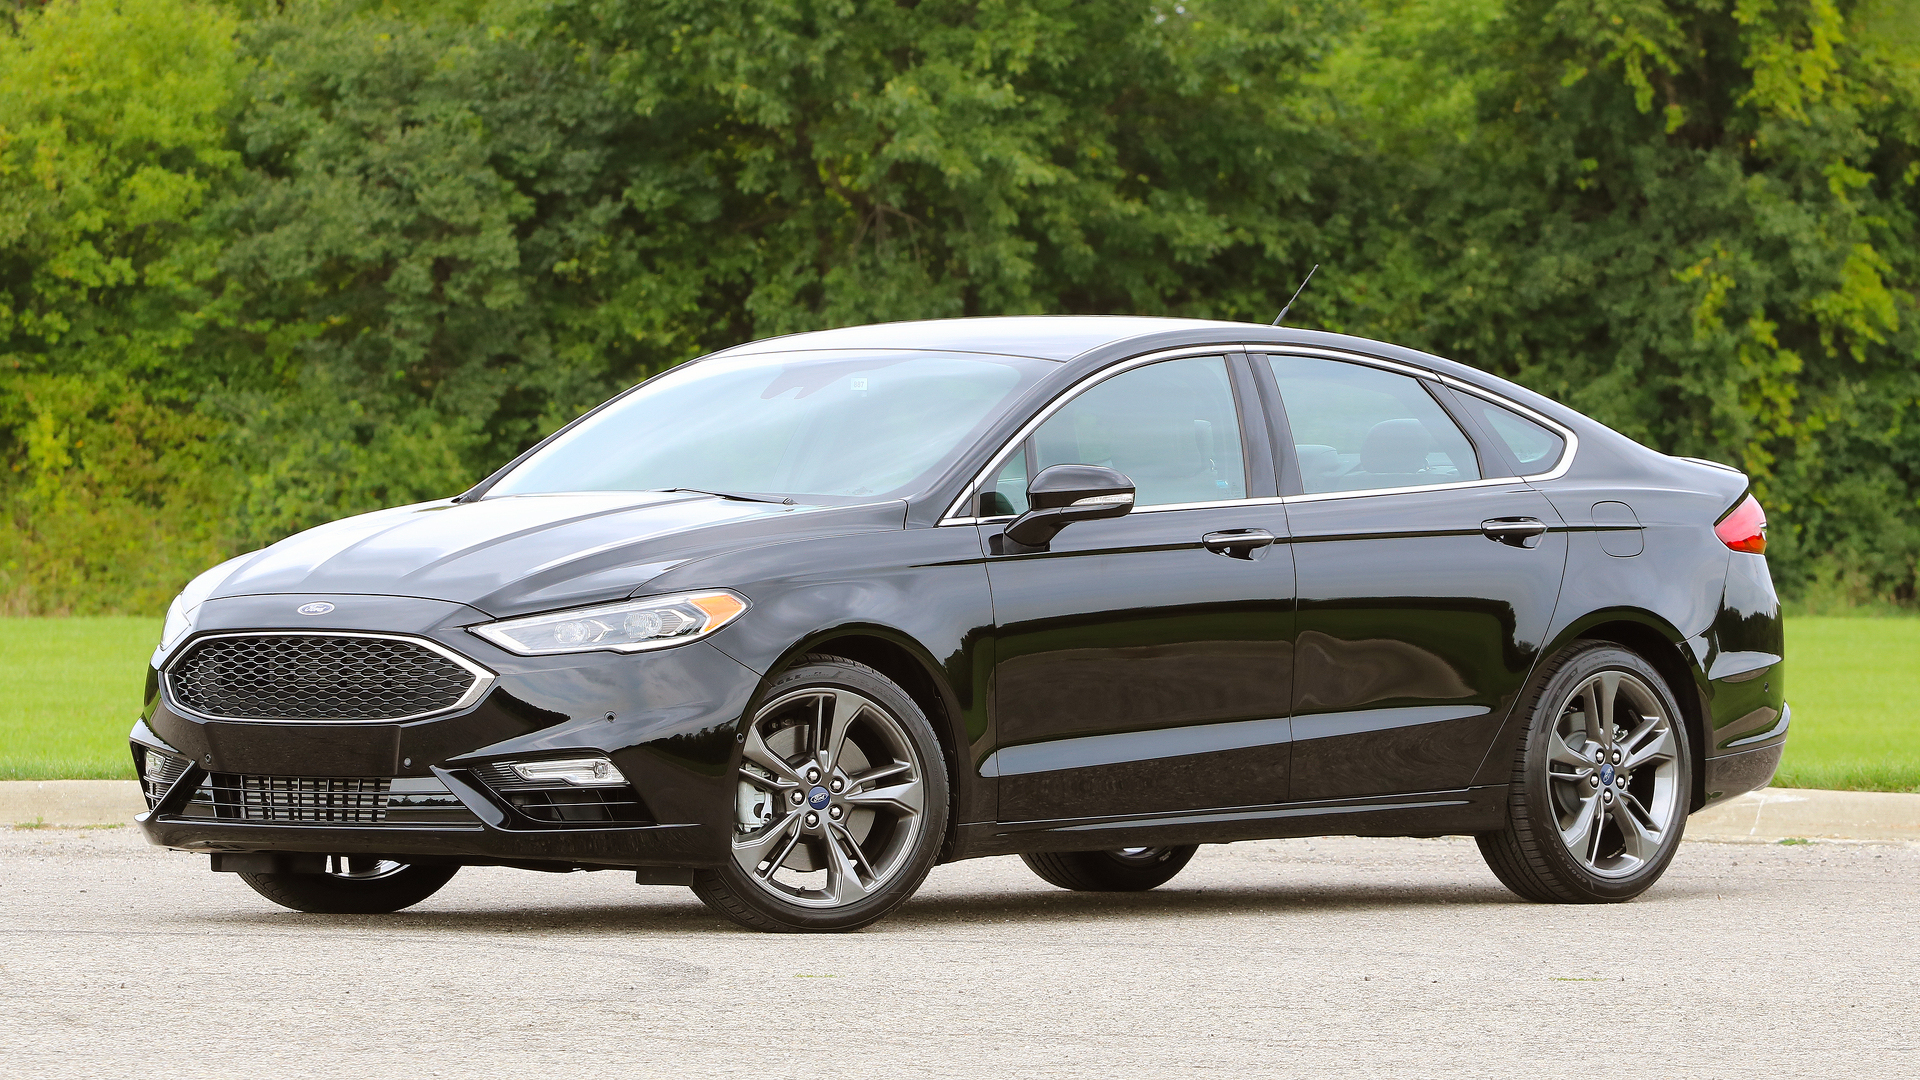 First Drive: 2017 Ford Fusion V6 Sport | Motor1.com